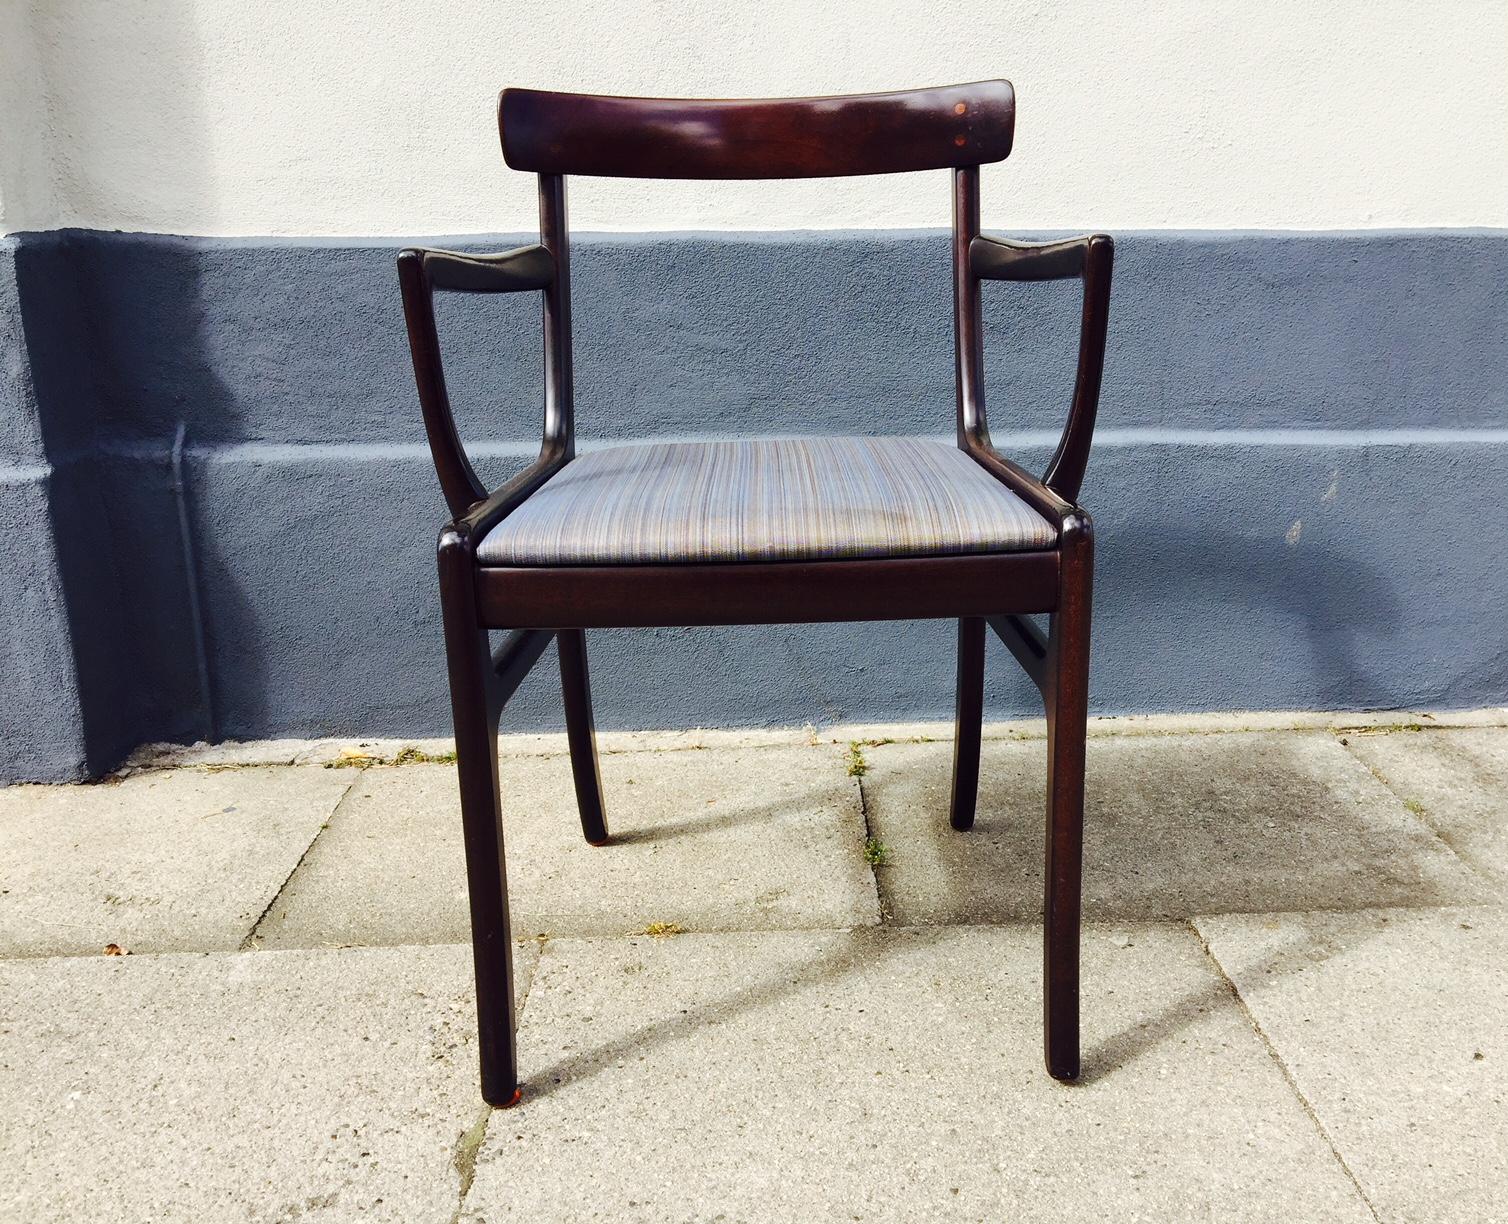 This midcentury model 'Rungstedlund' mahogany armchair was designed by Danish architect Ole Wanscher in the 1940s, and was manufactured by P. Jeppesen in the 1960s. The piece is suitable for a home office, entrance hall, or as a singlet in the